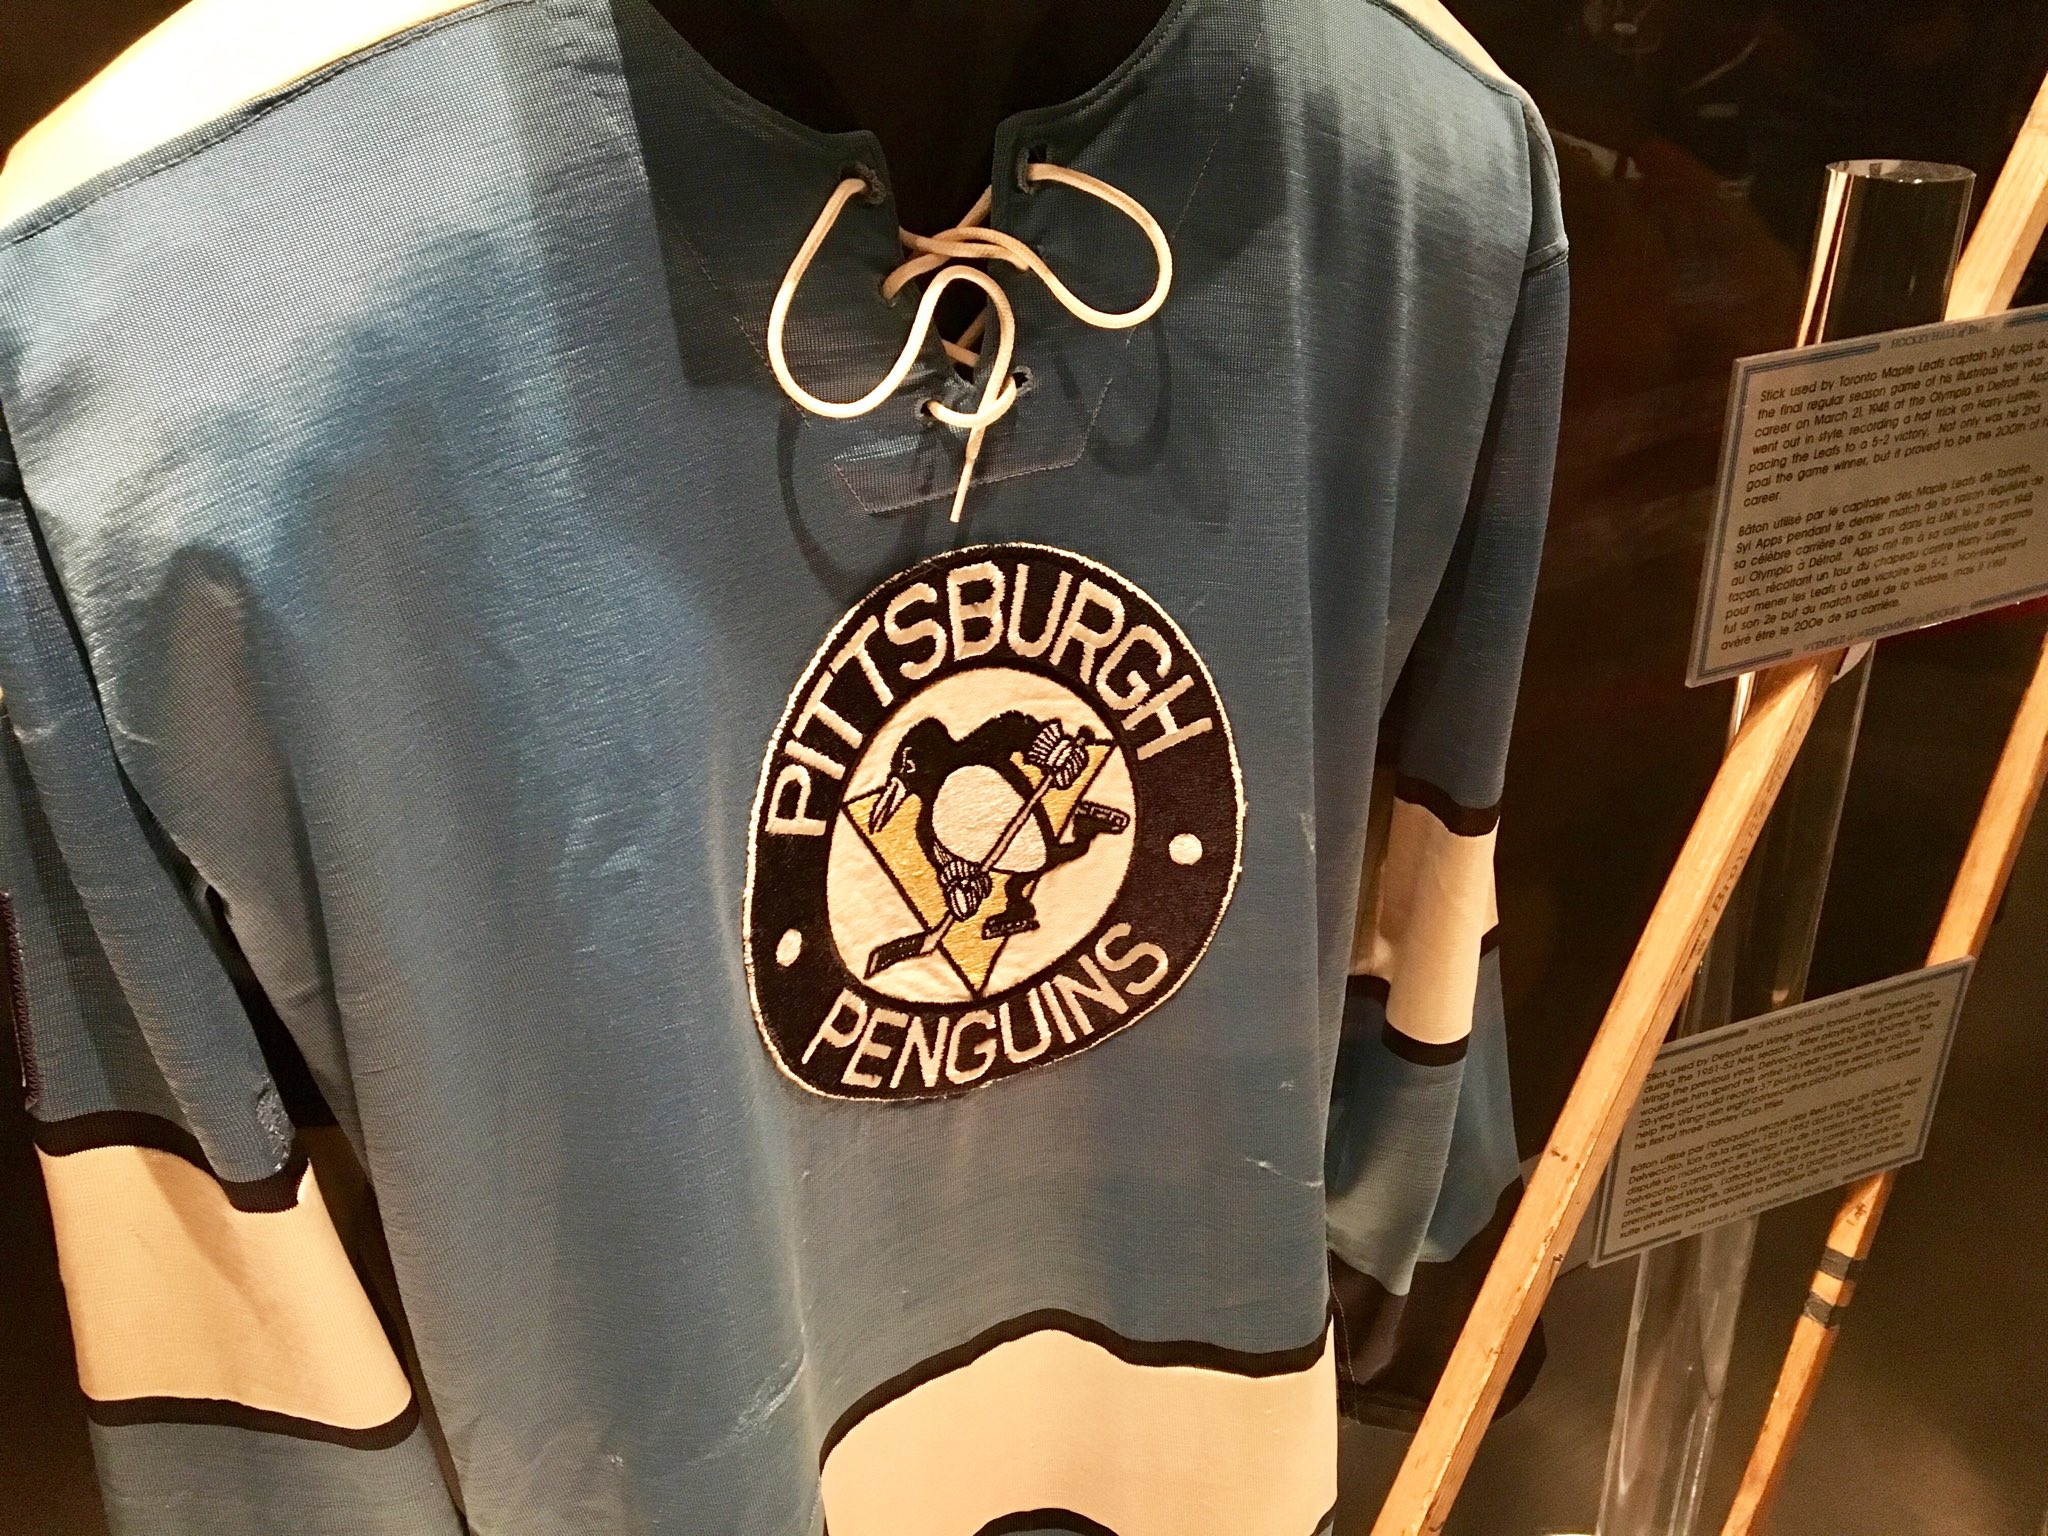 Penguins Hall of Famers jersey